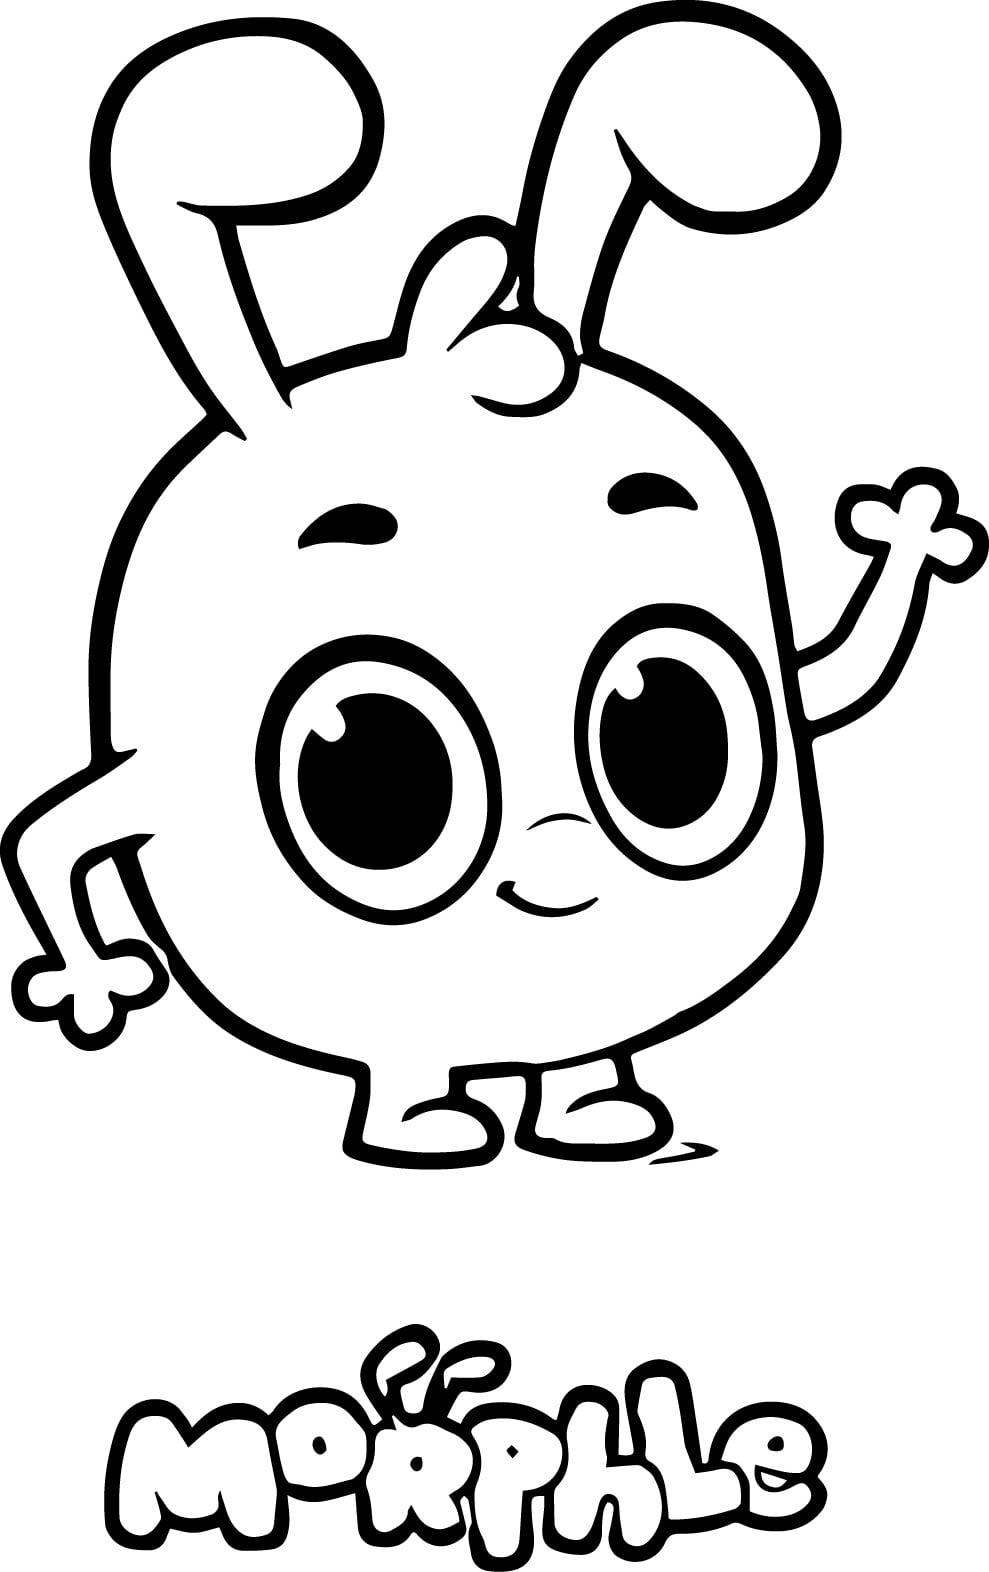 Morphle Cartoon My Cute Coloring Page | Wecoloringpage.com